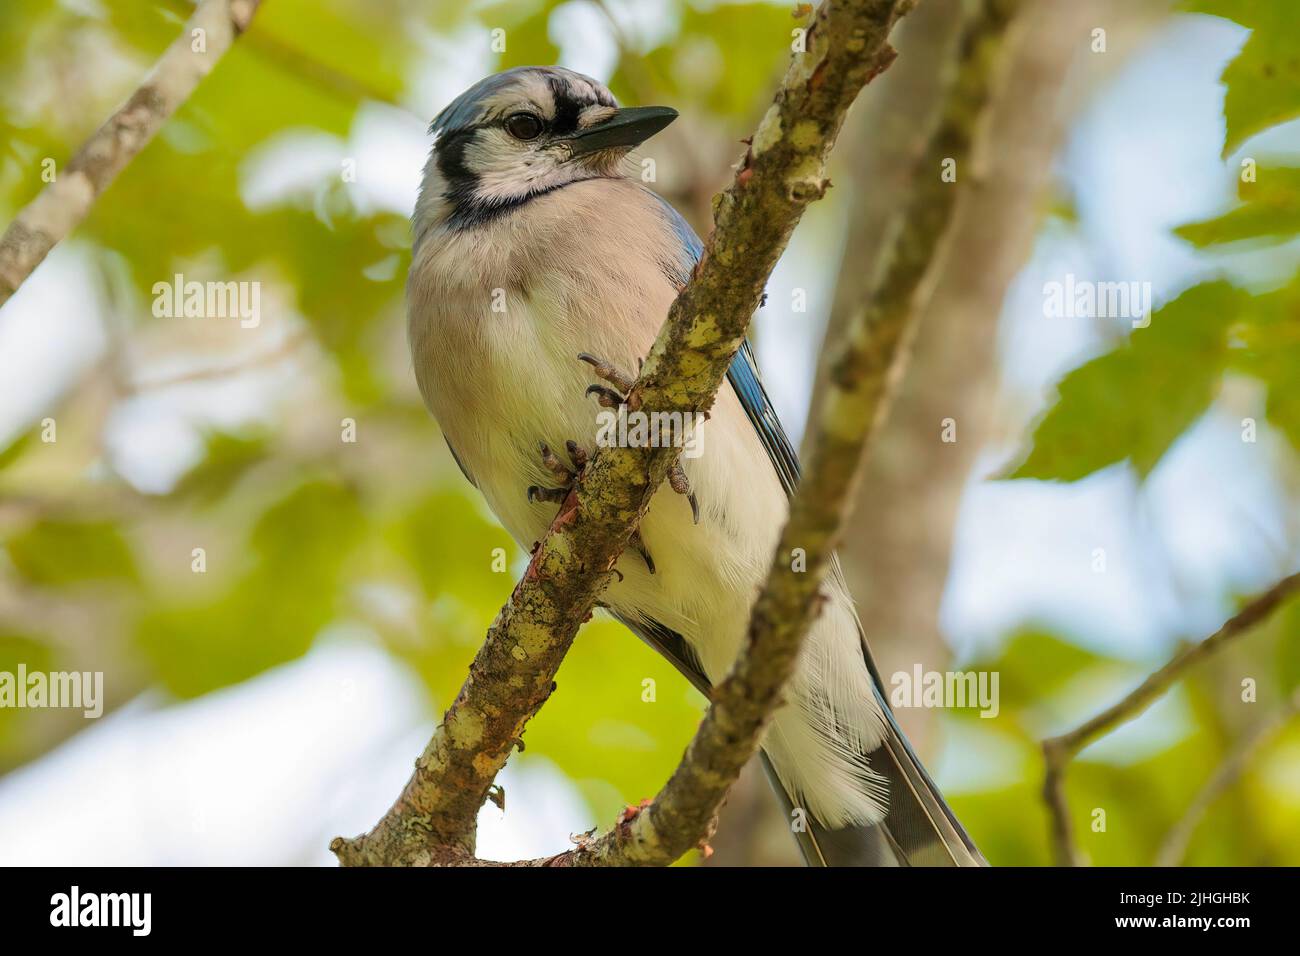 Bluejay perched on a branch Stock Photo